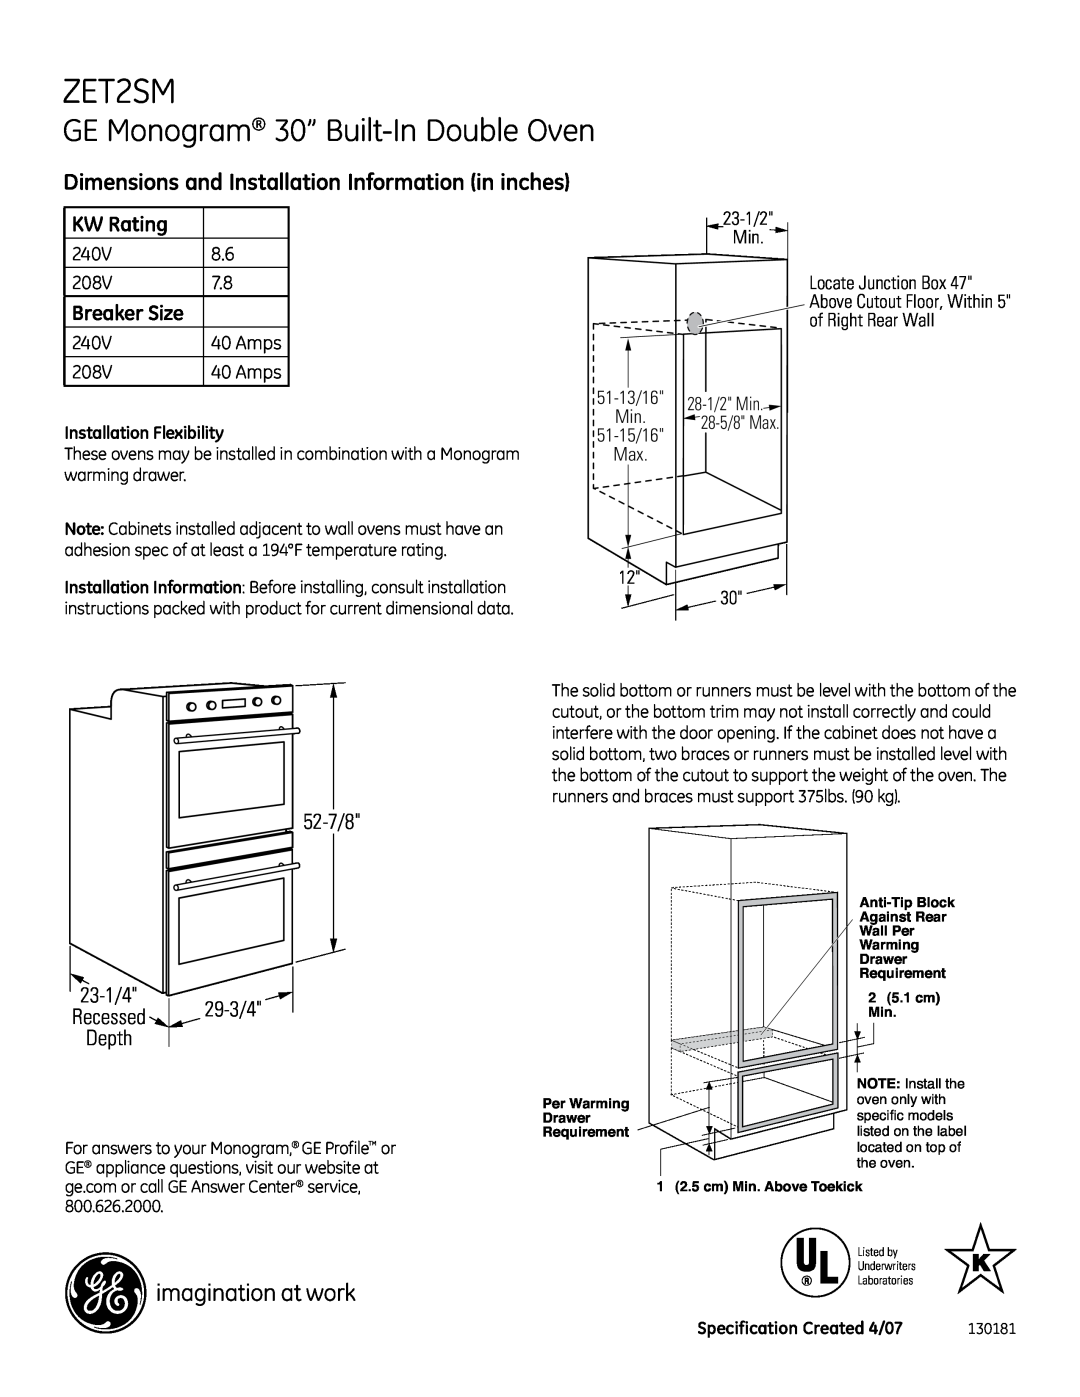 GE ZET2SM dimensions GE Monogram 30” Built-In Double Oven, Dimensions and Installation Information in inches, KW Rating 